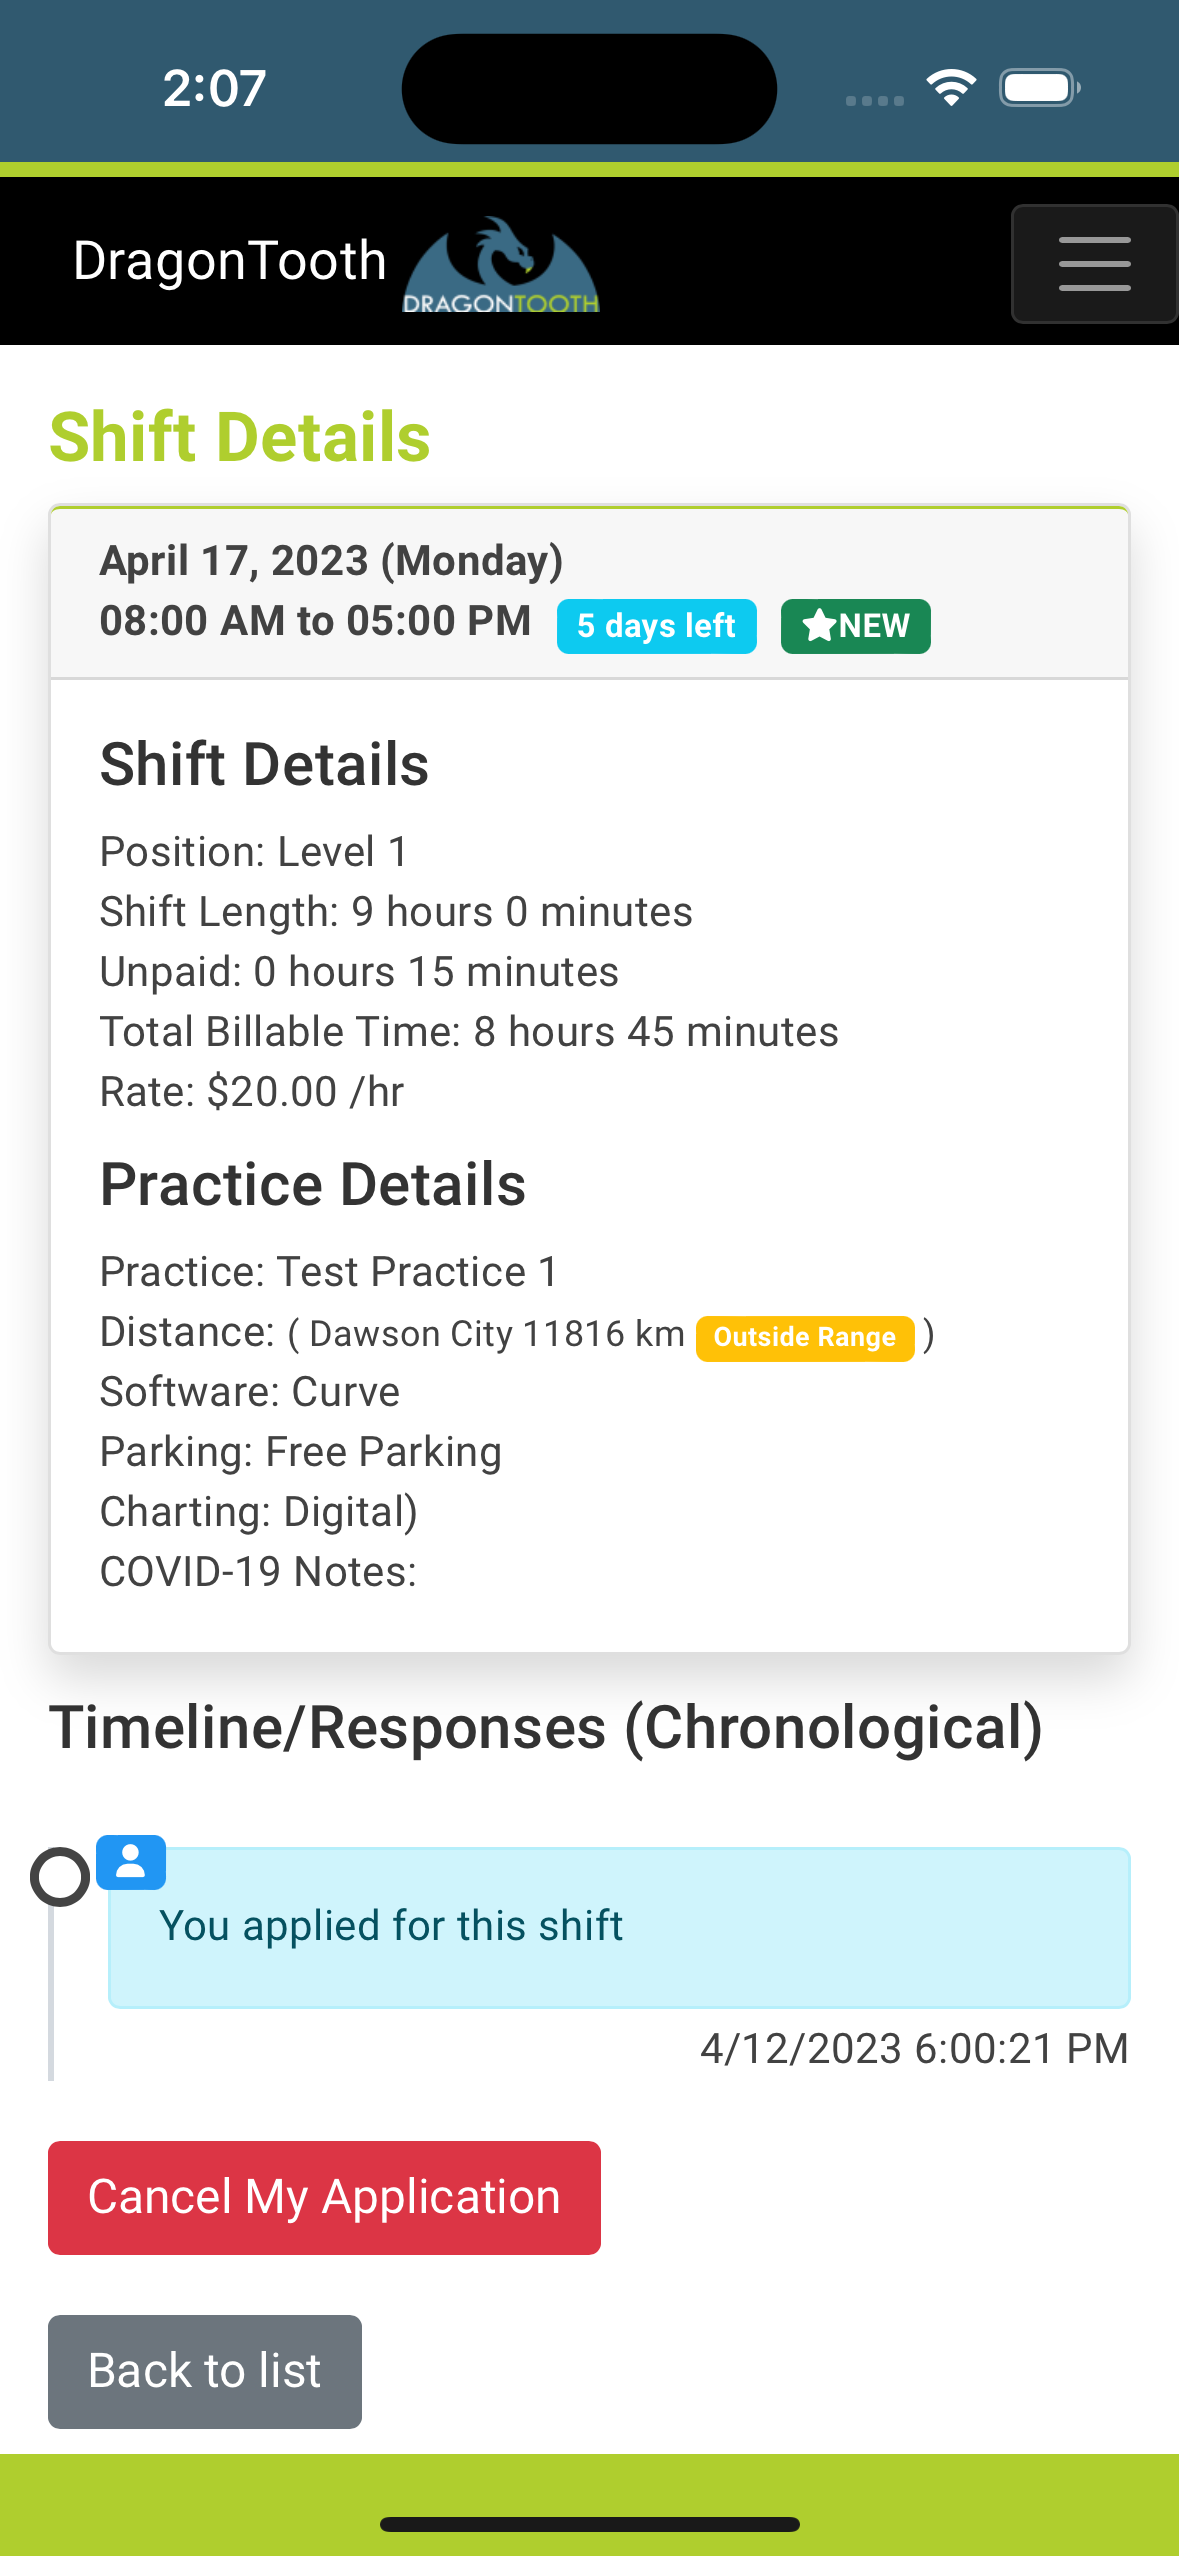 DragonTooth mobile app shift details view